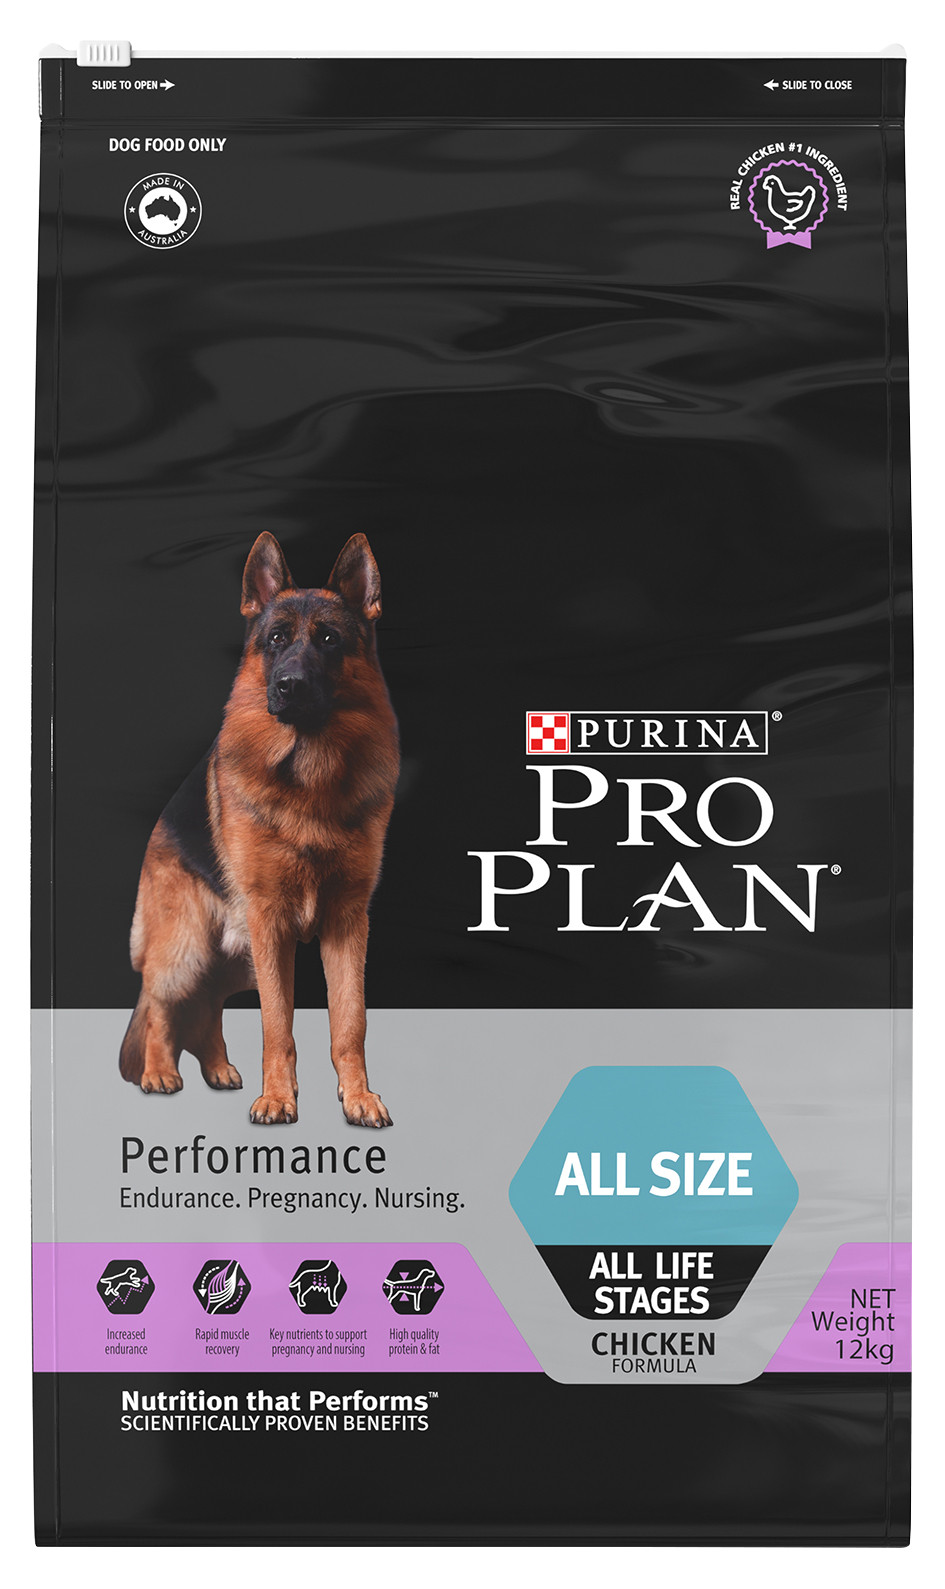 Purina All Life Stage All Size Performance Chicken Formula 12kg